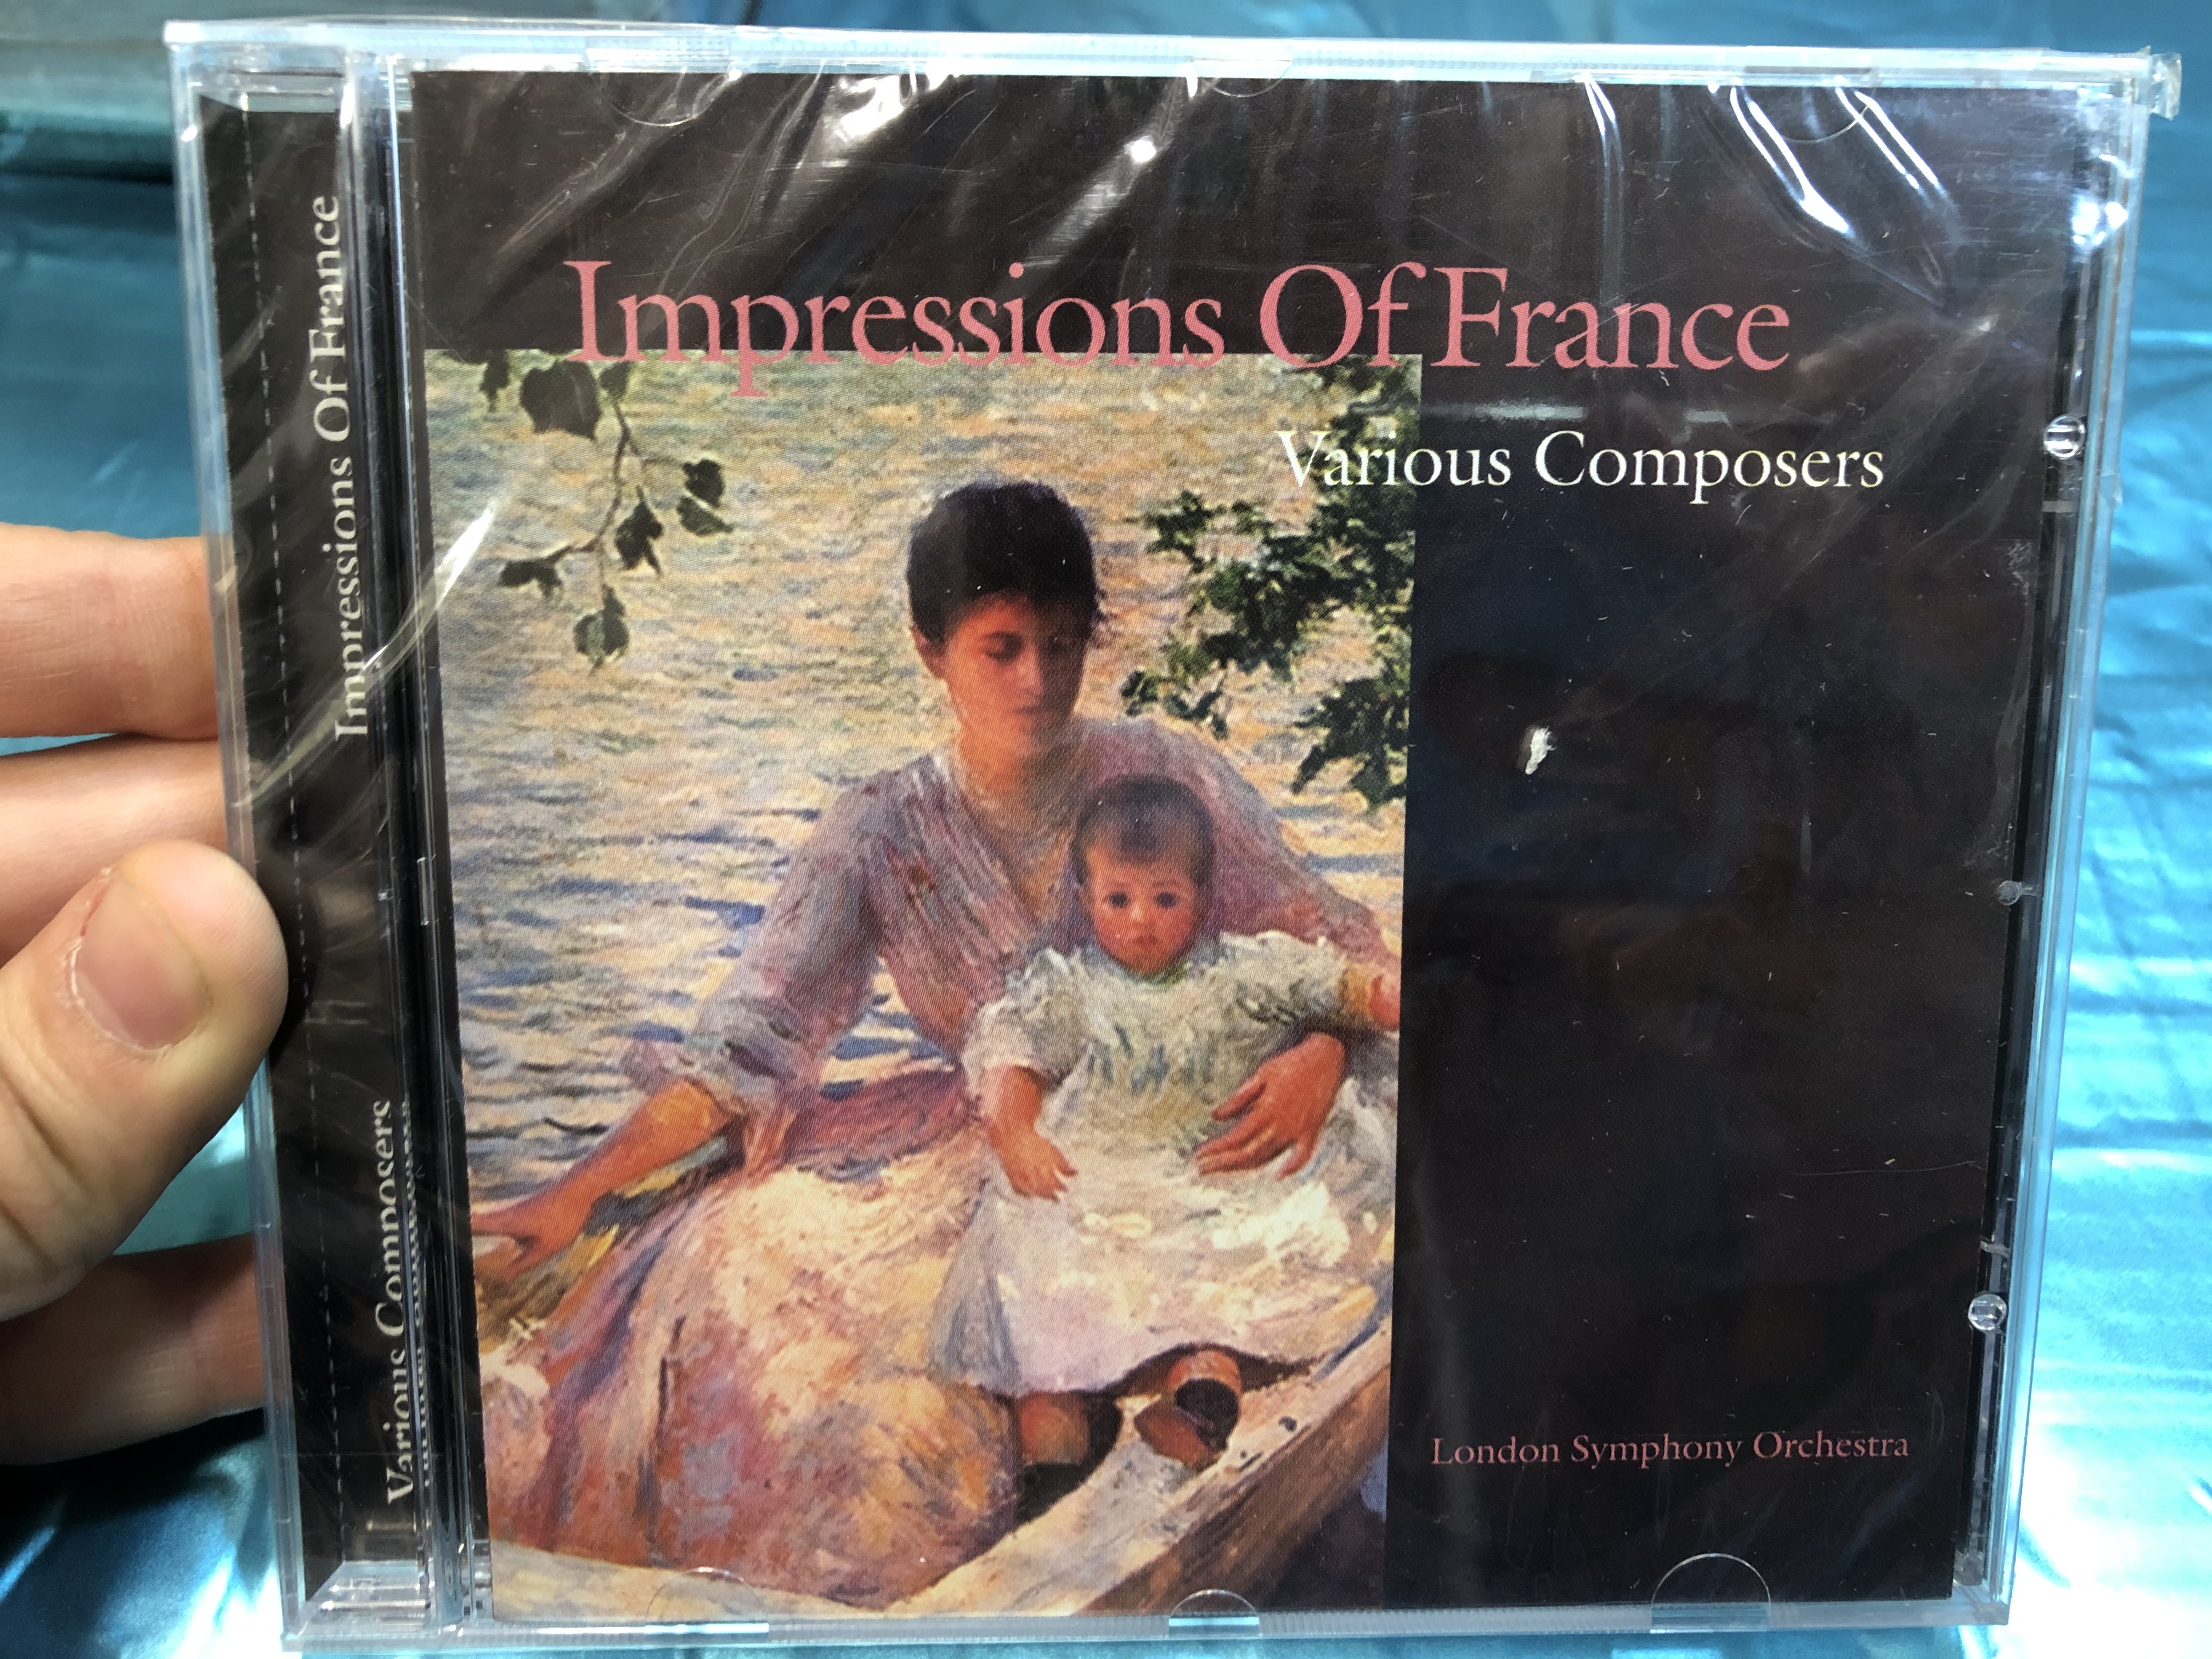 impressions-of-france-various-composers-london-symphony-orchestra-a-play-classics-audio-cd-1998-9018-2-1-.jpg